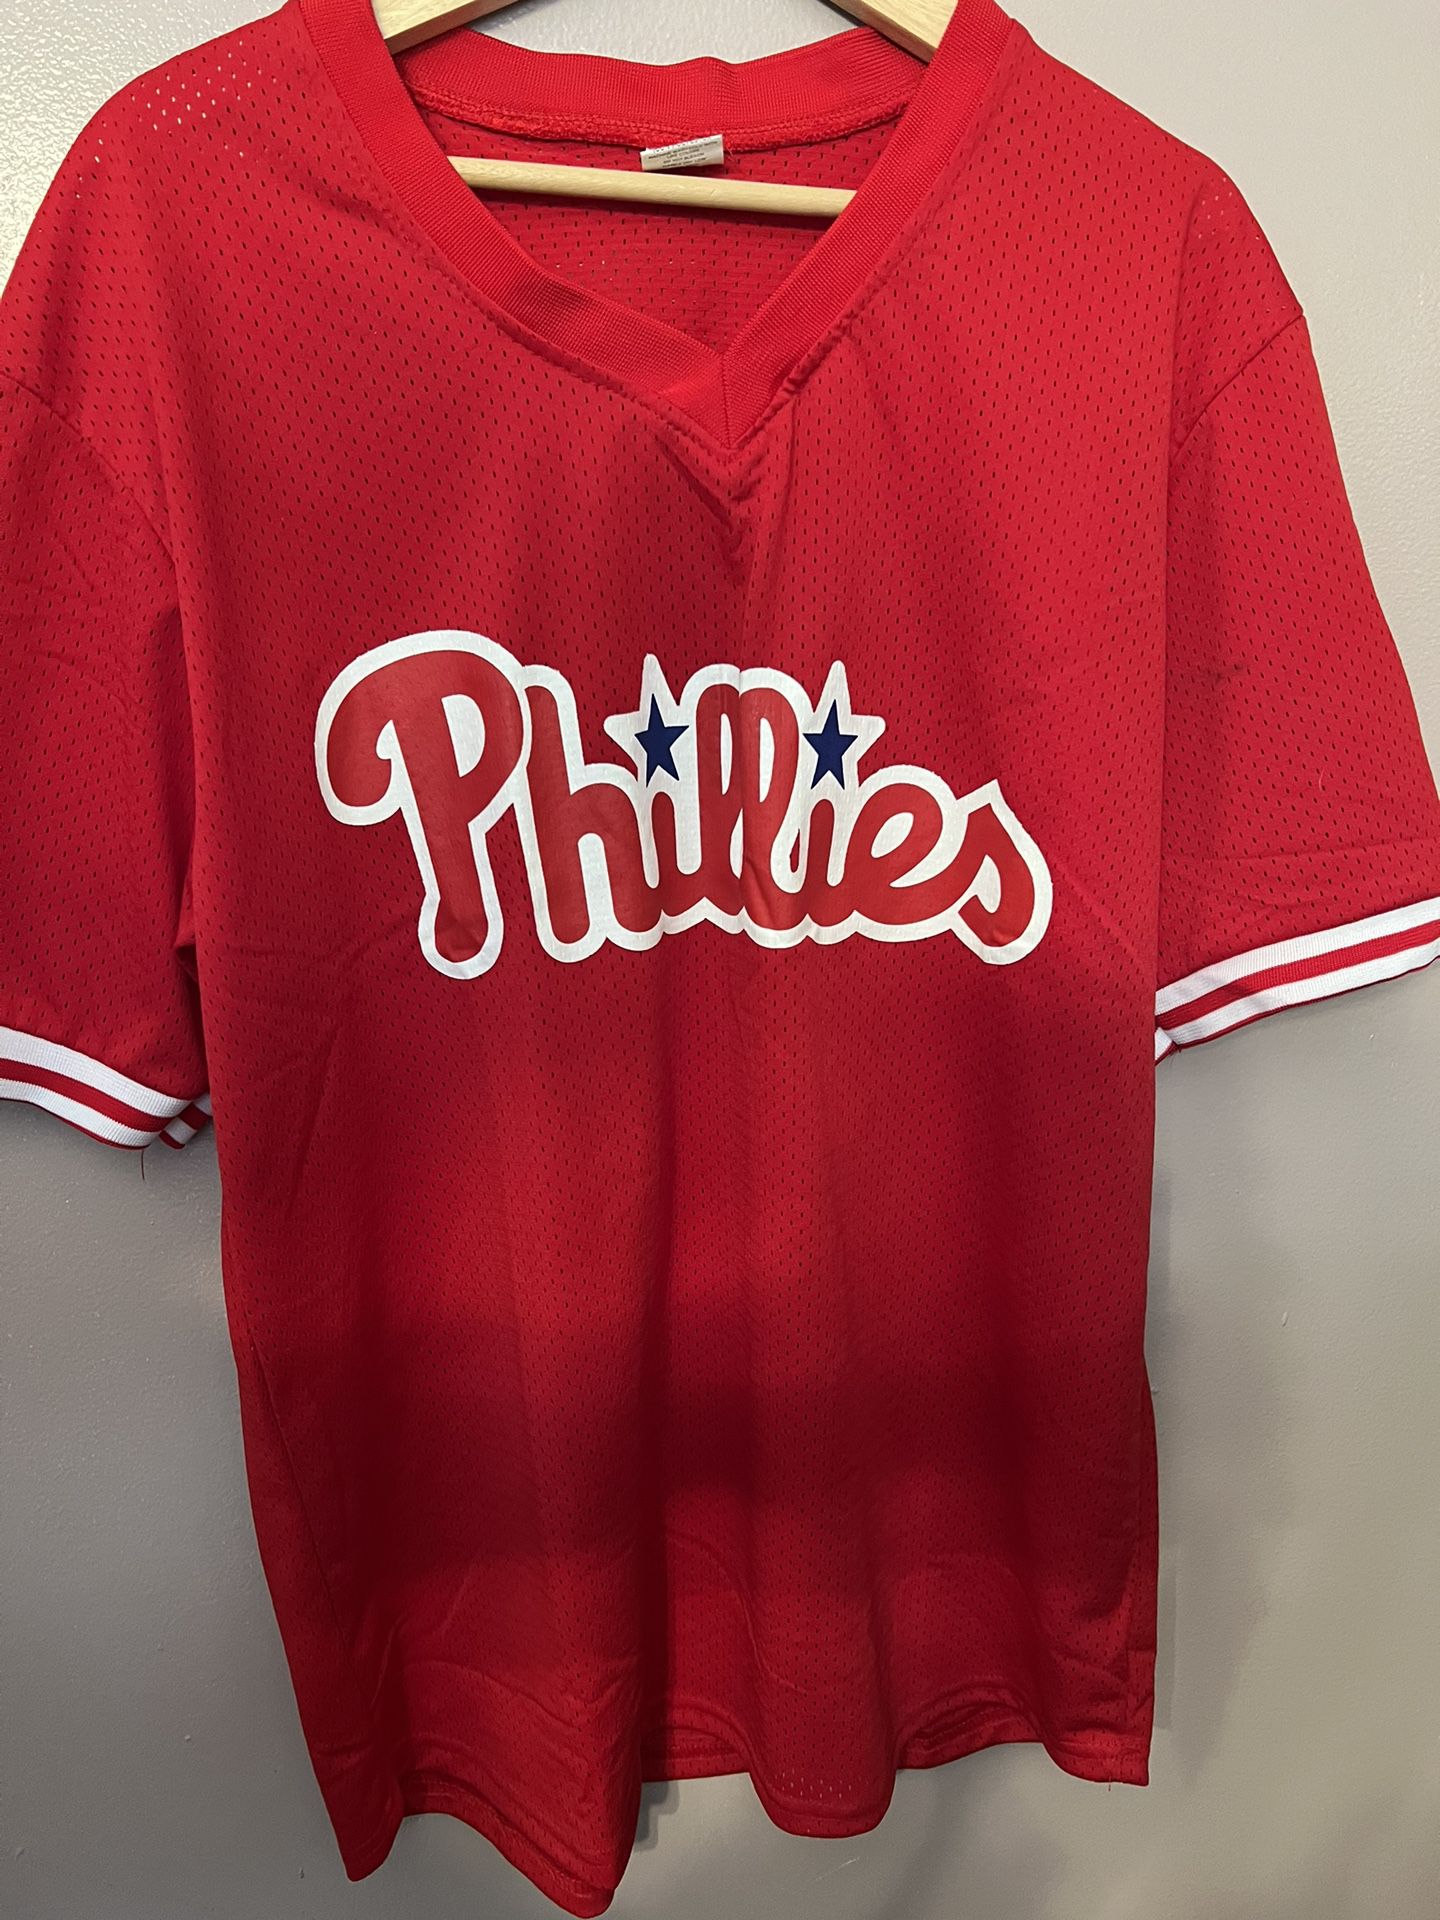 Philadelphia Phillies Jersey Size XL Pre Owned for Sale in Gates-north  Gates, NY - OfferUp